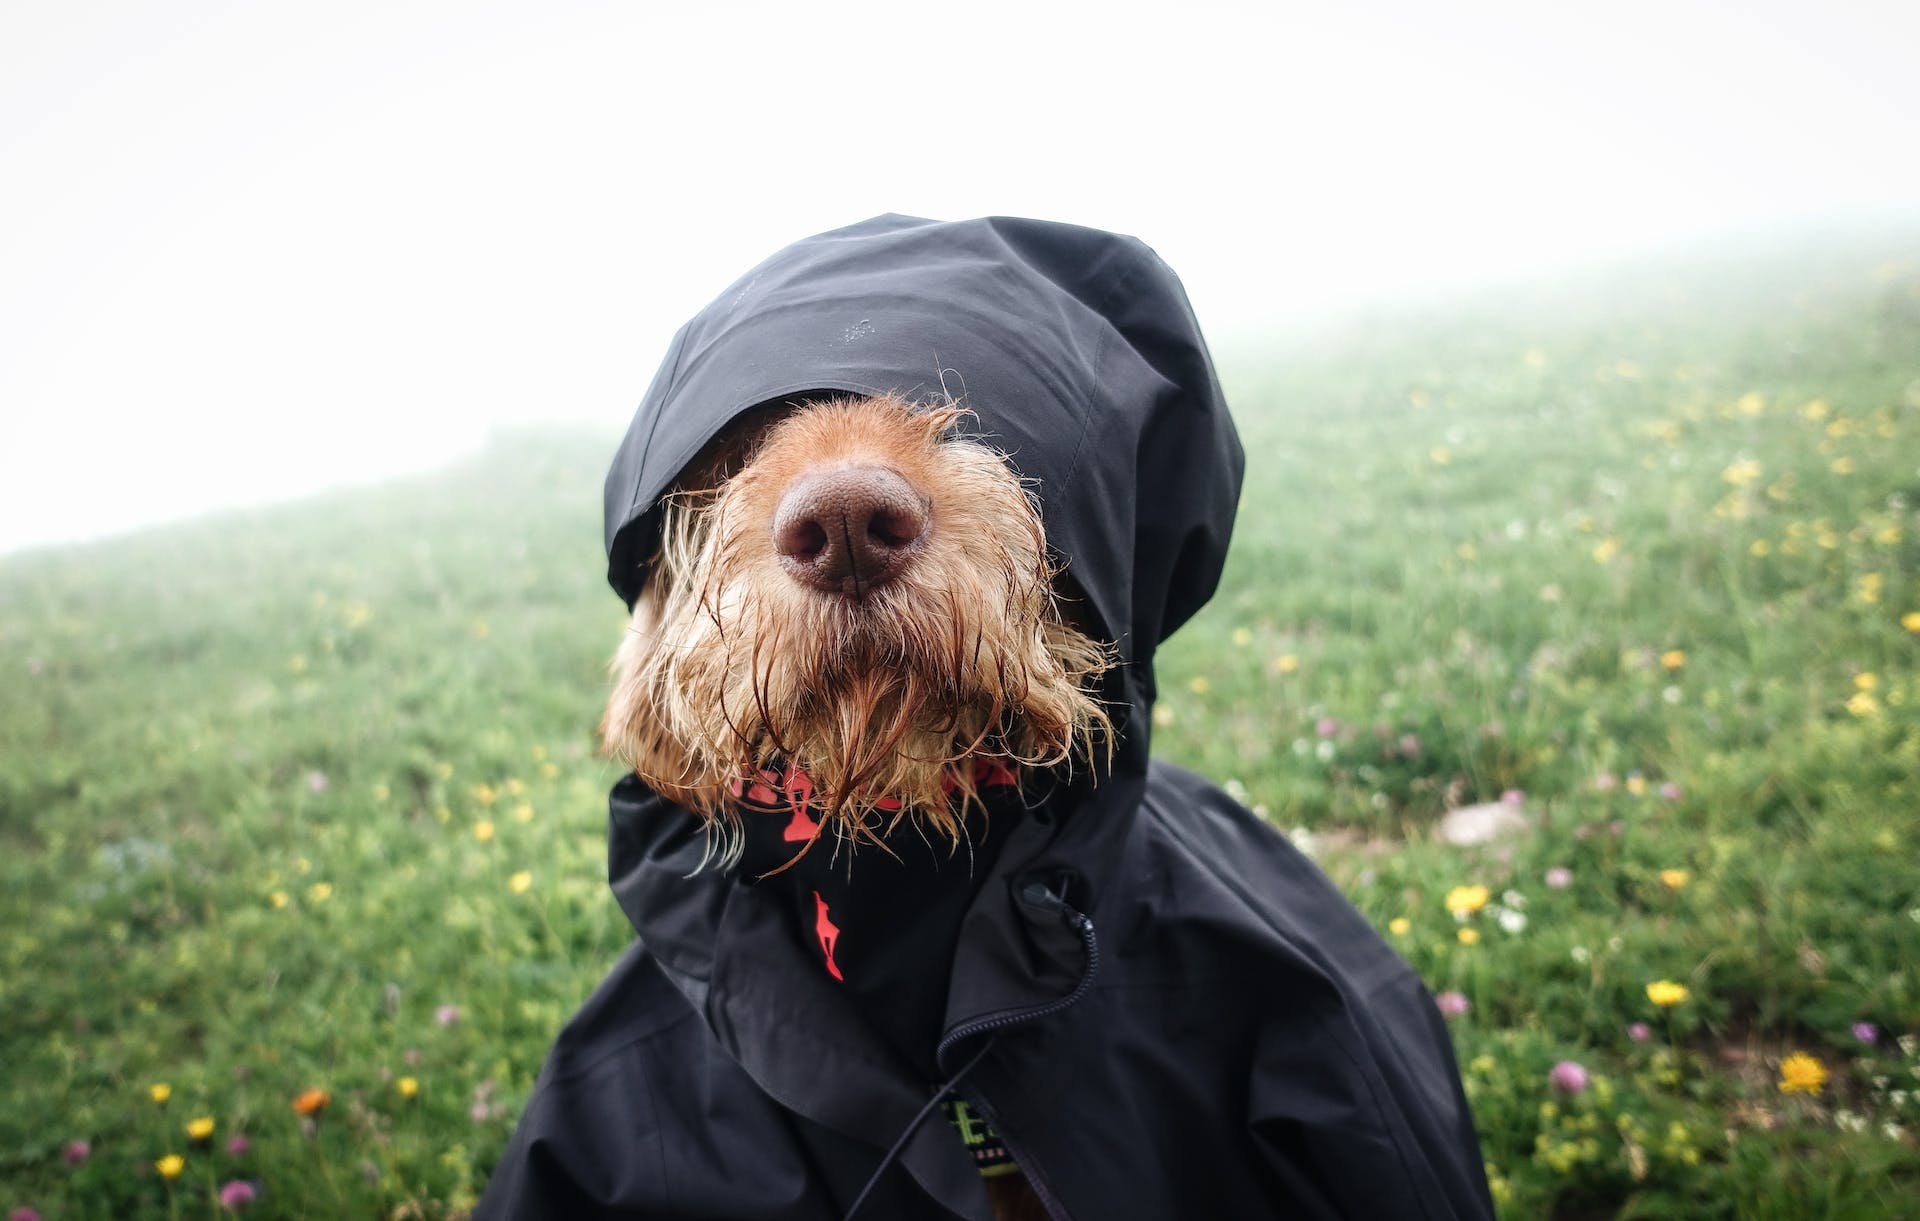 A dog wearing a raincoat in a rainy field